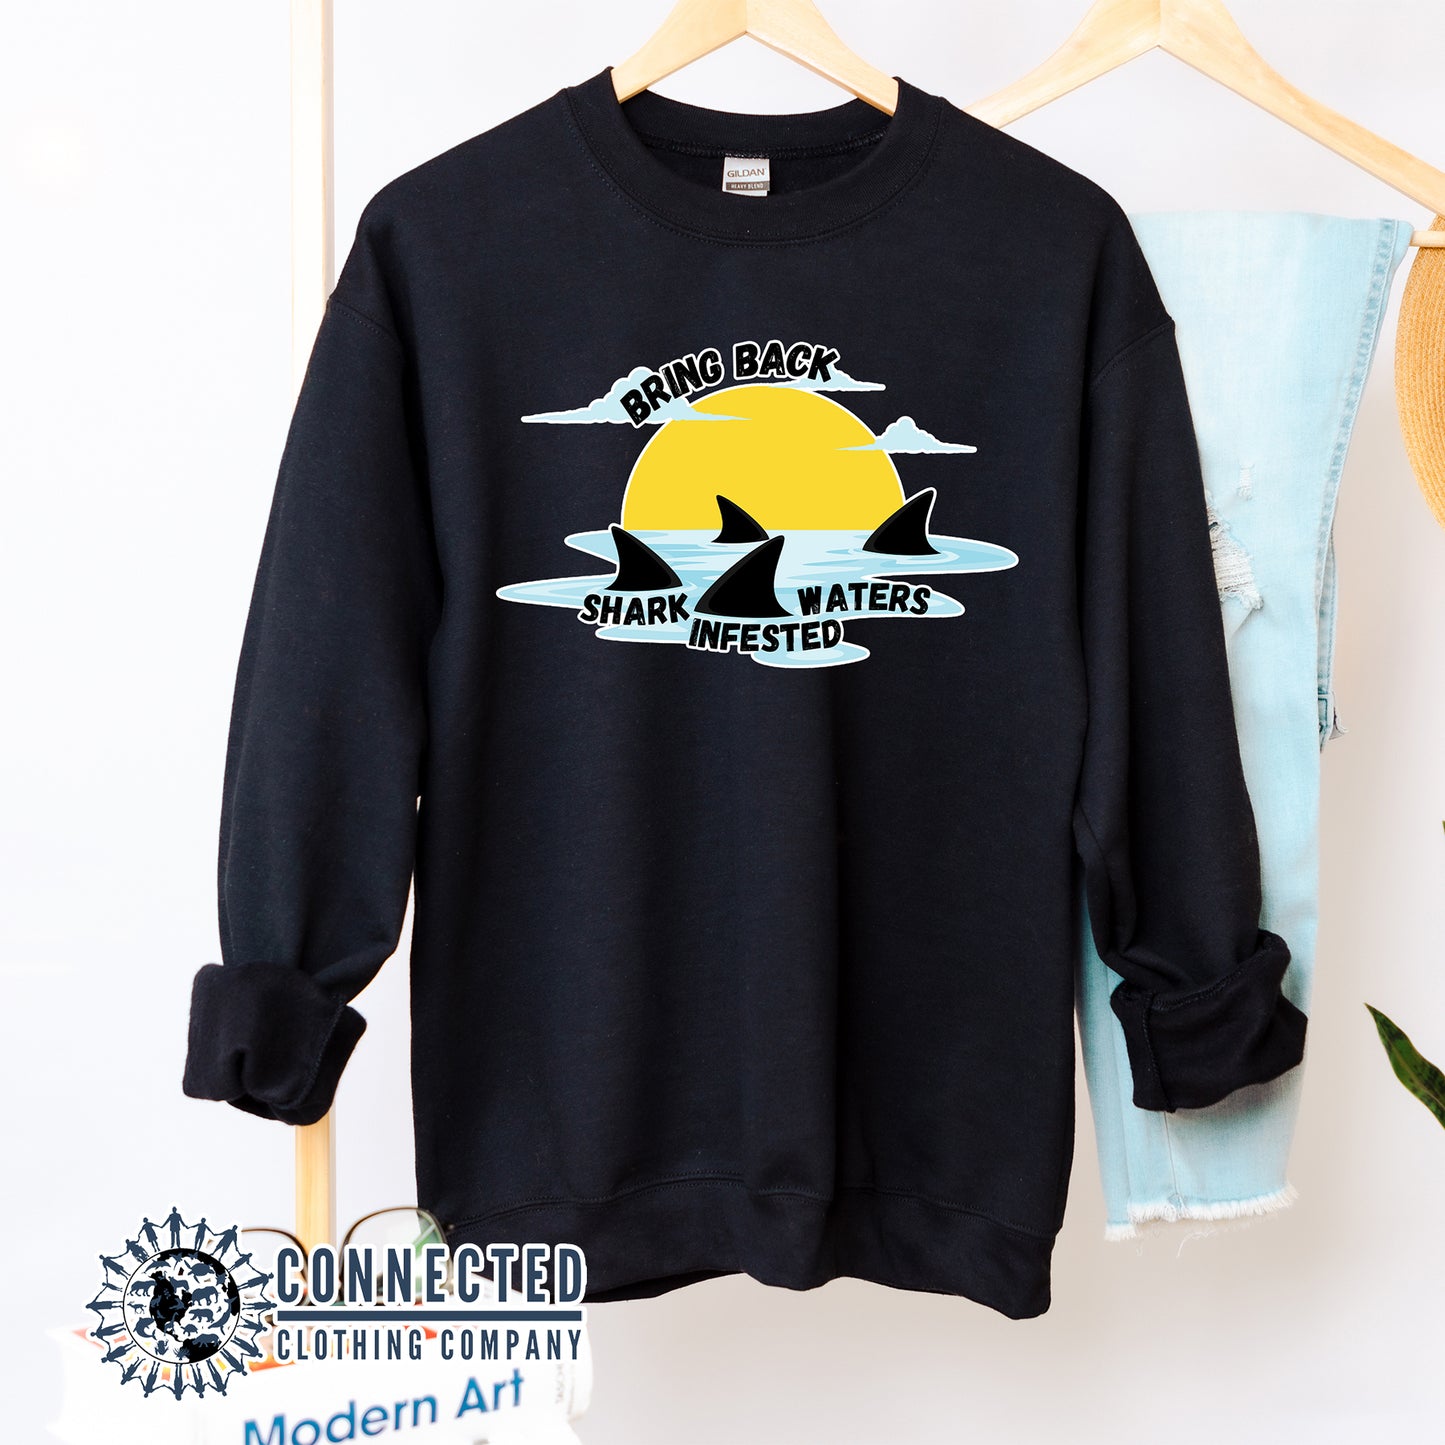 Black Bring Back Shark Infested Waters Unisex Crewneck Sweatshirt - sweetsherriloudesigns - Ethically and Sustainably Made - 10% of profits donated to shark conservation and ocean conservation